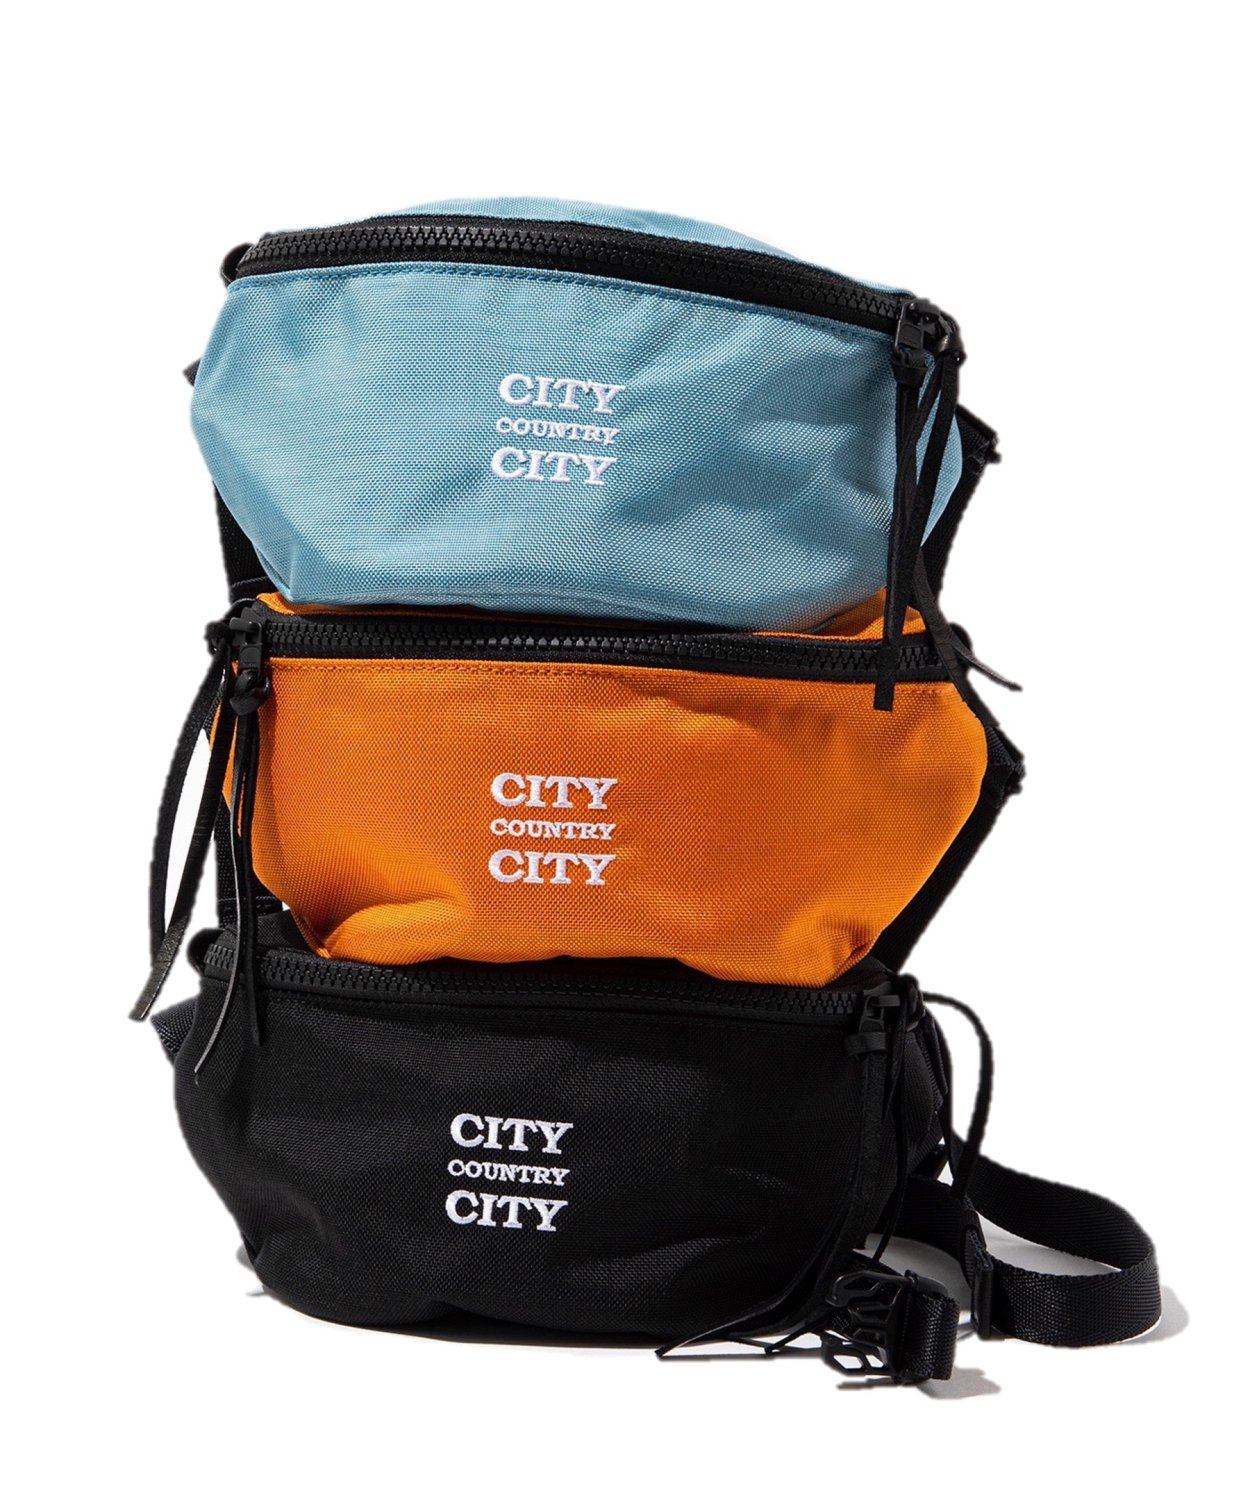 HOBO / EVERYDAY WAIST POUCH NYLON OXFORD for CITY COUNTRY CITY(HB